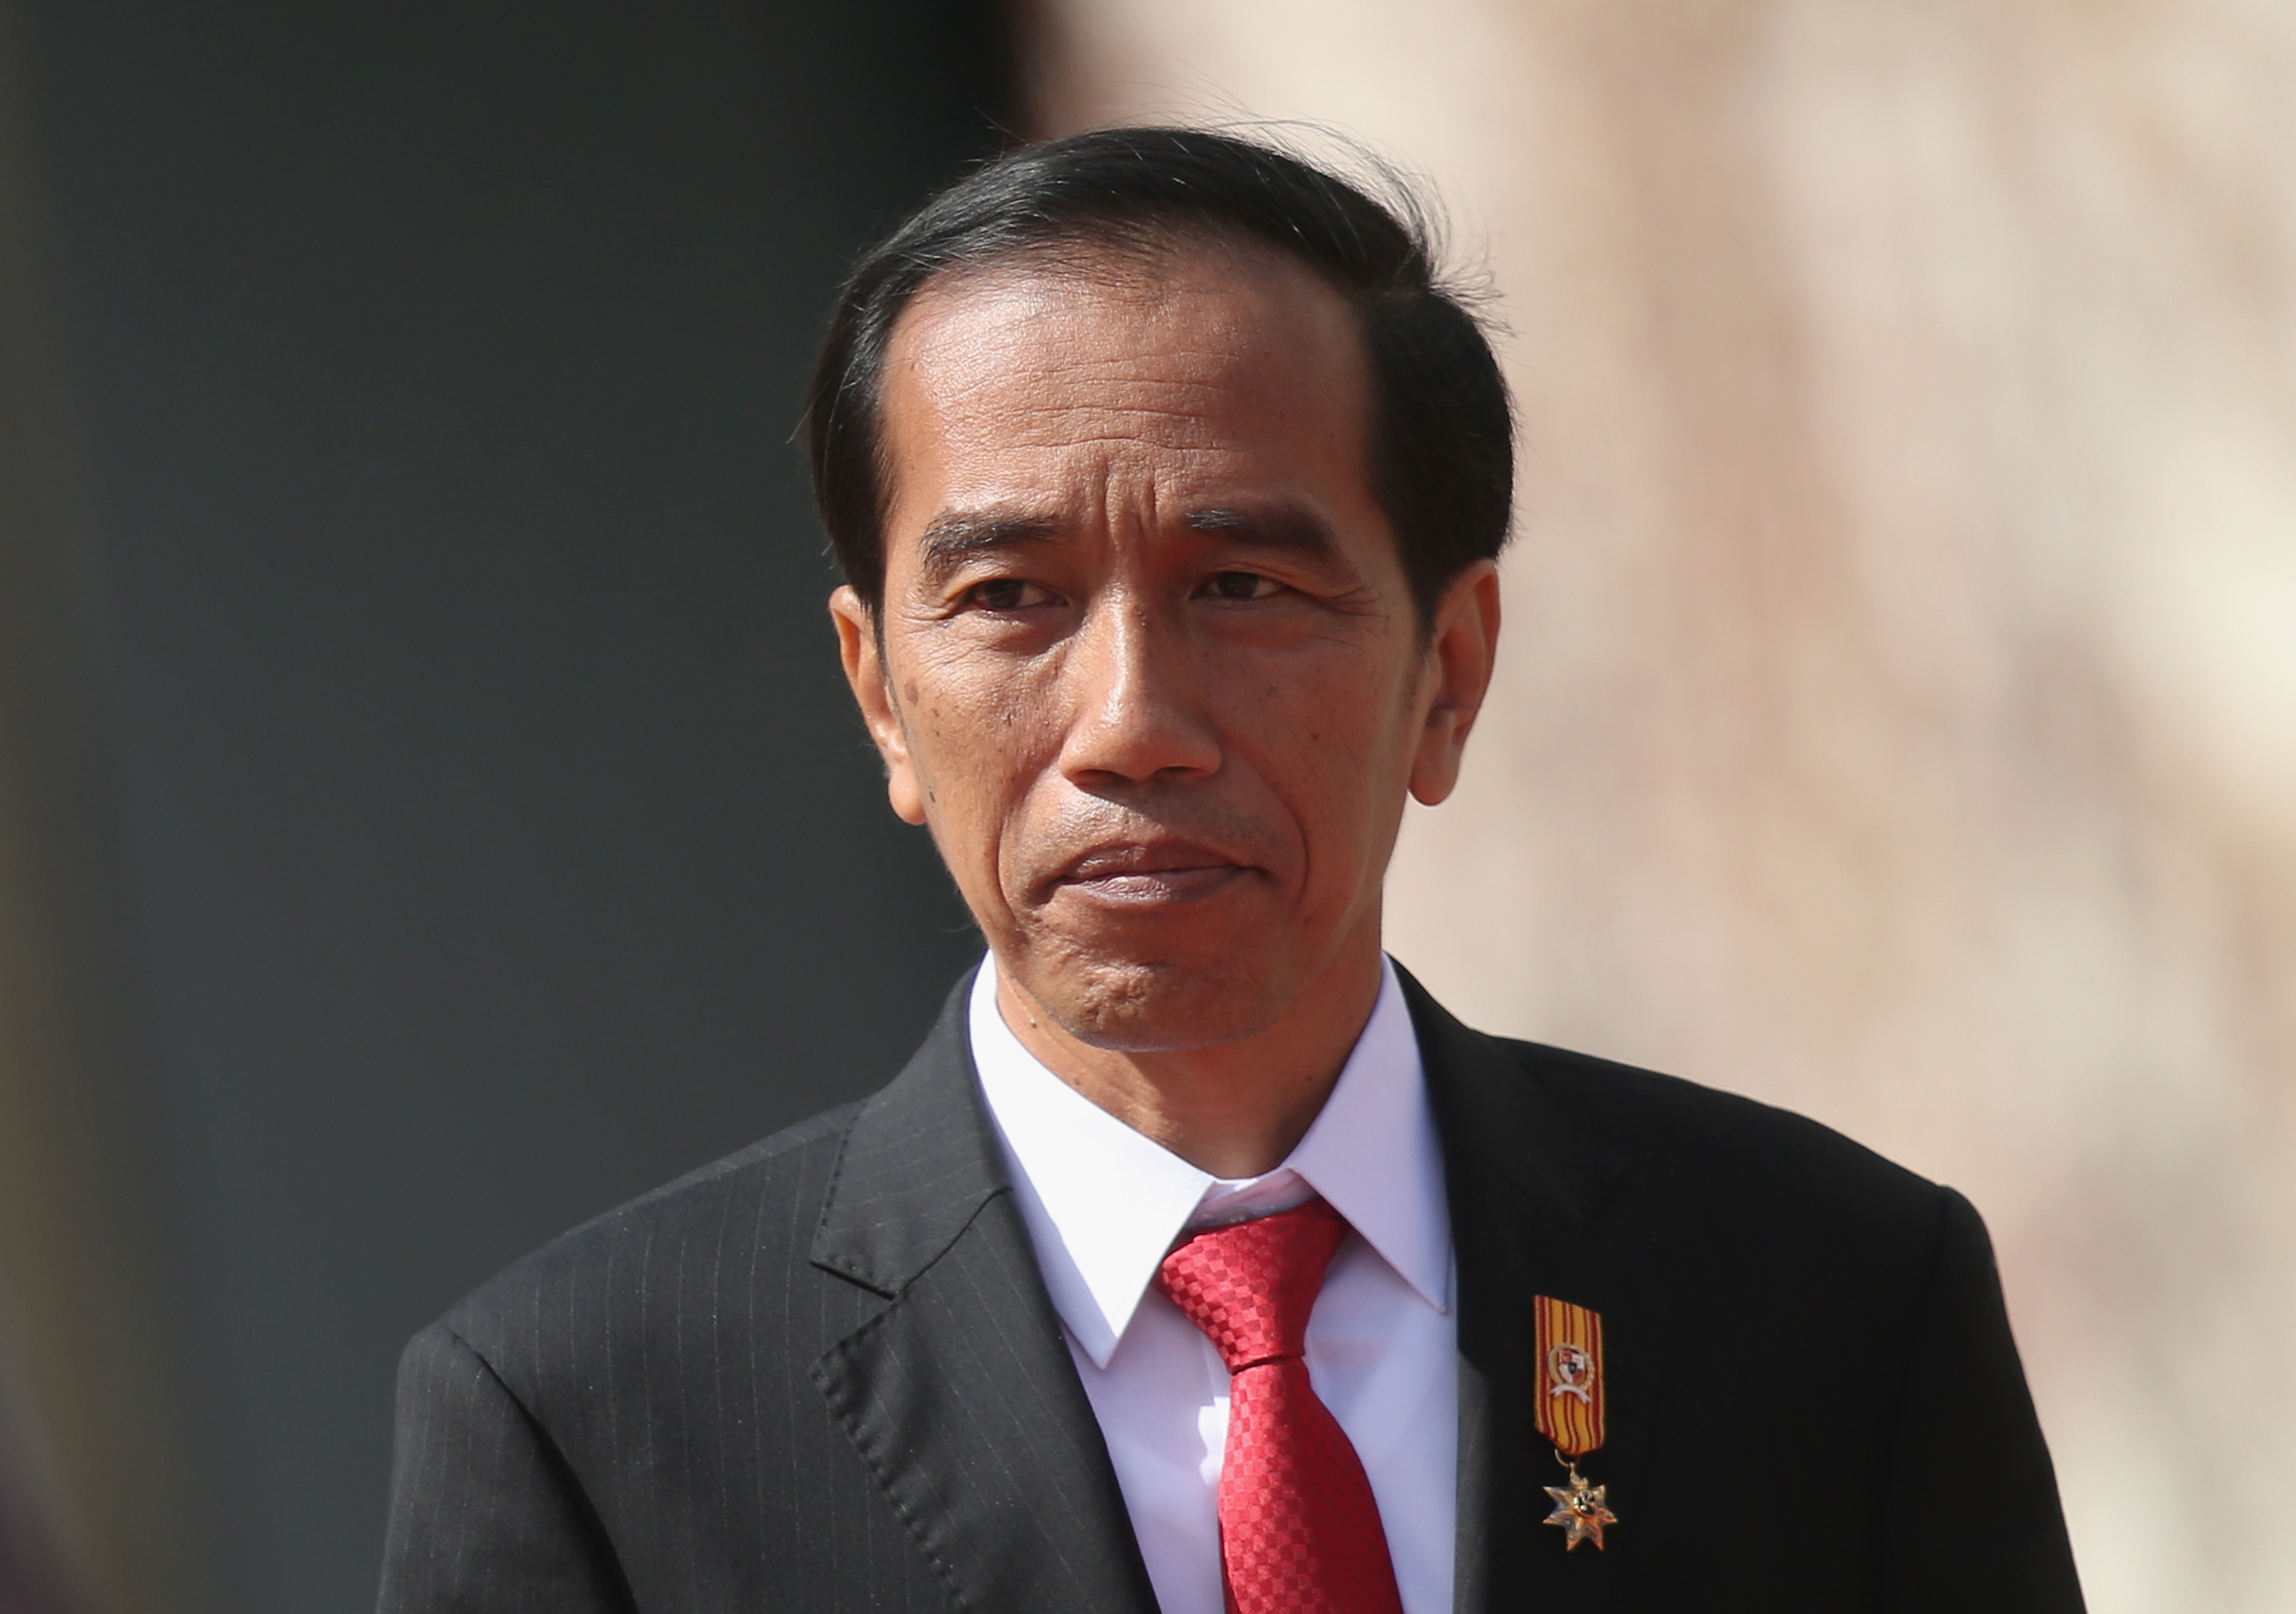 Indonesian President Joko Widodo arrives at the Chancellery in Berlin to meet with German Chancellor Angela Merkel on April 18, 2016 (Sean Gallup—Getty Images)